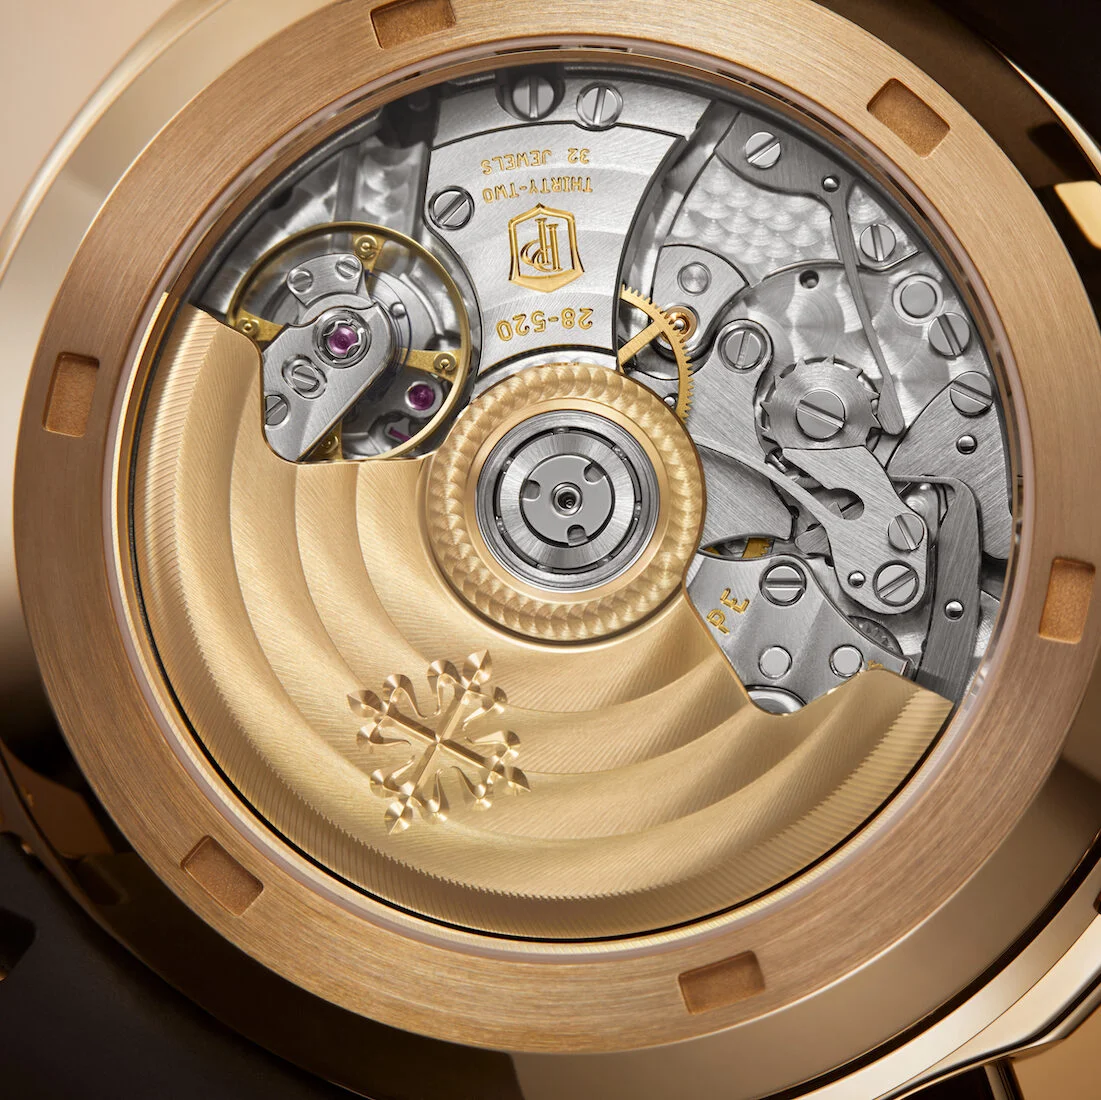 Patek Philippe Thierry Stern Interview: What's Next for Swiss